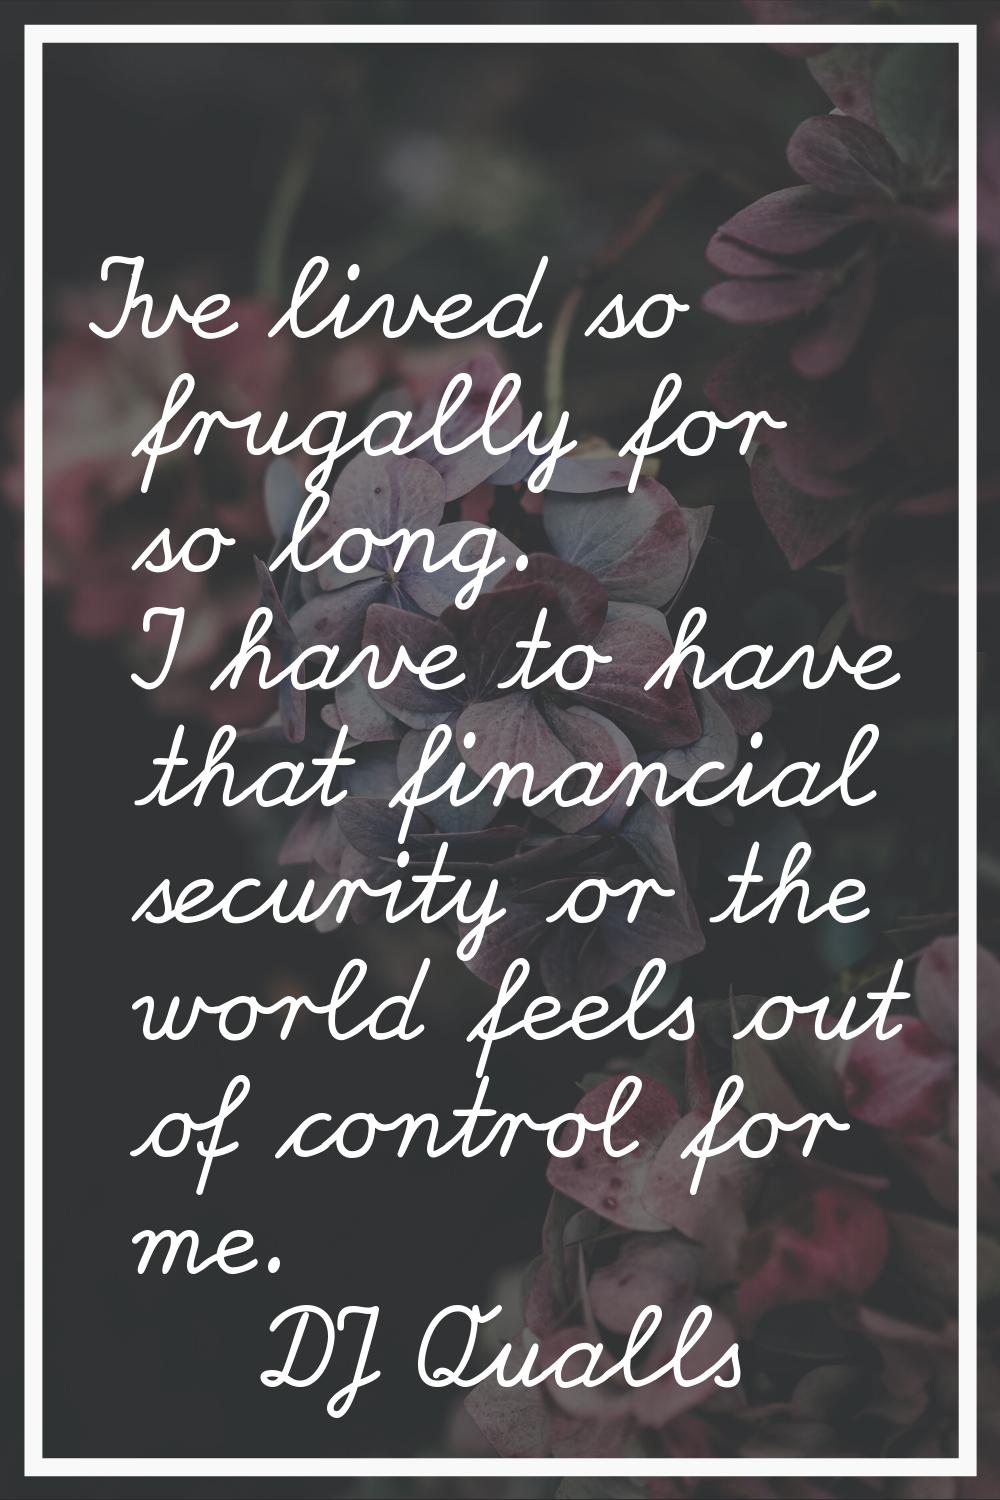 I've lived so frugally for so long. I have to have that financial security or the world feels out o